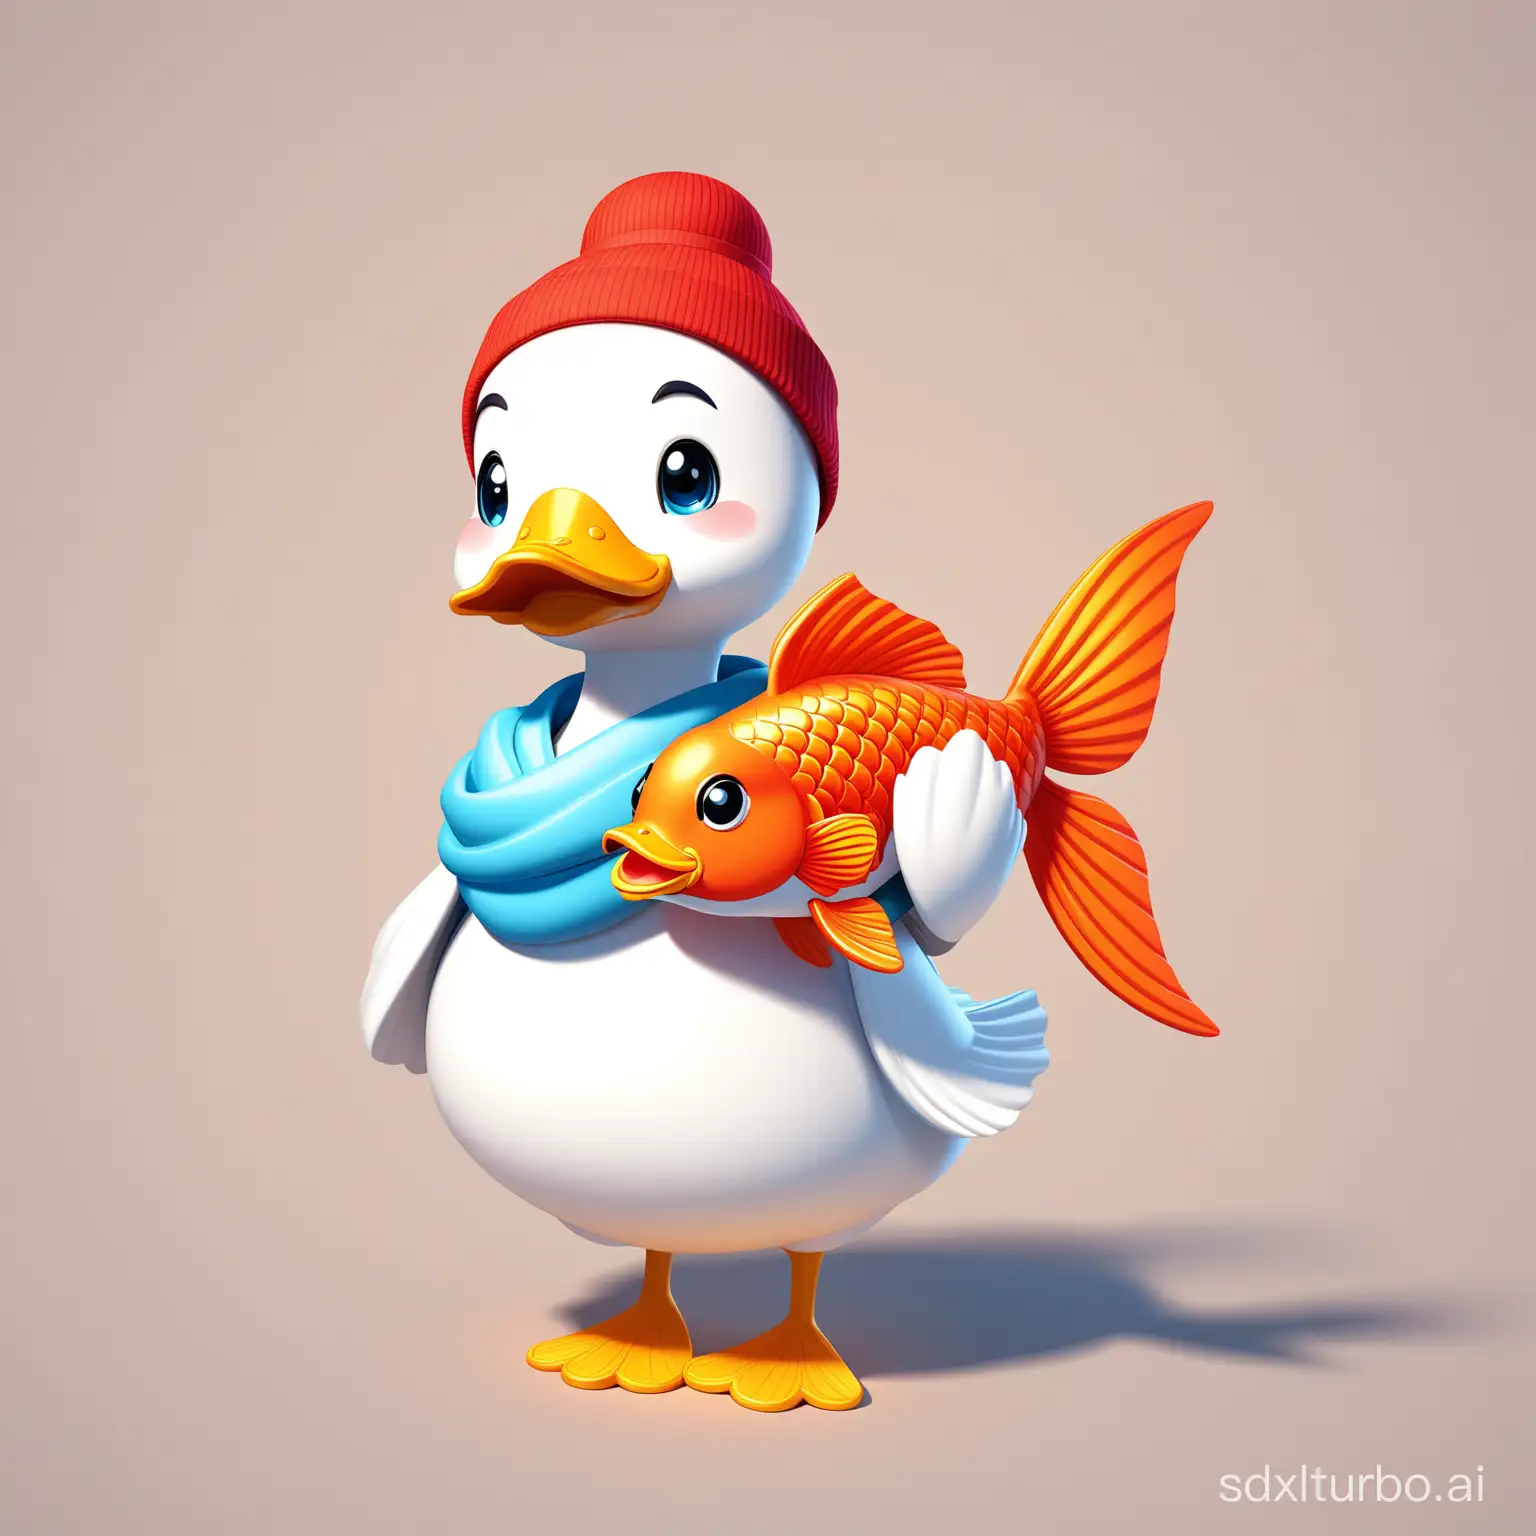 Adorable-White-Duck-Holding-Chinese-Koi-Fish-Toy-in-Casual-Disney-Style